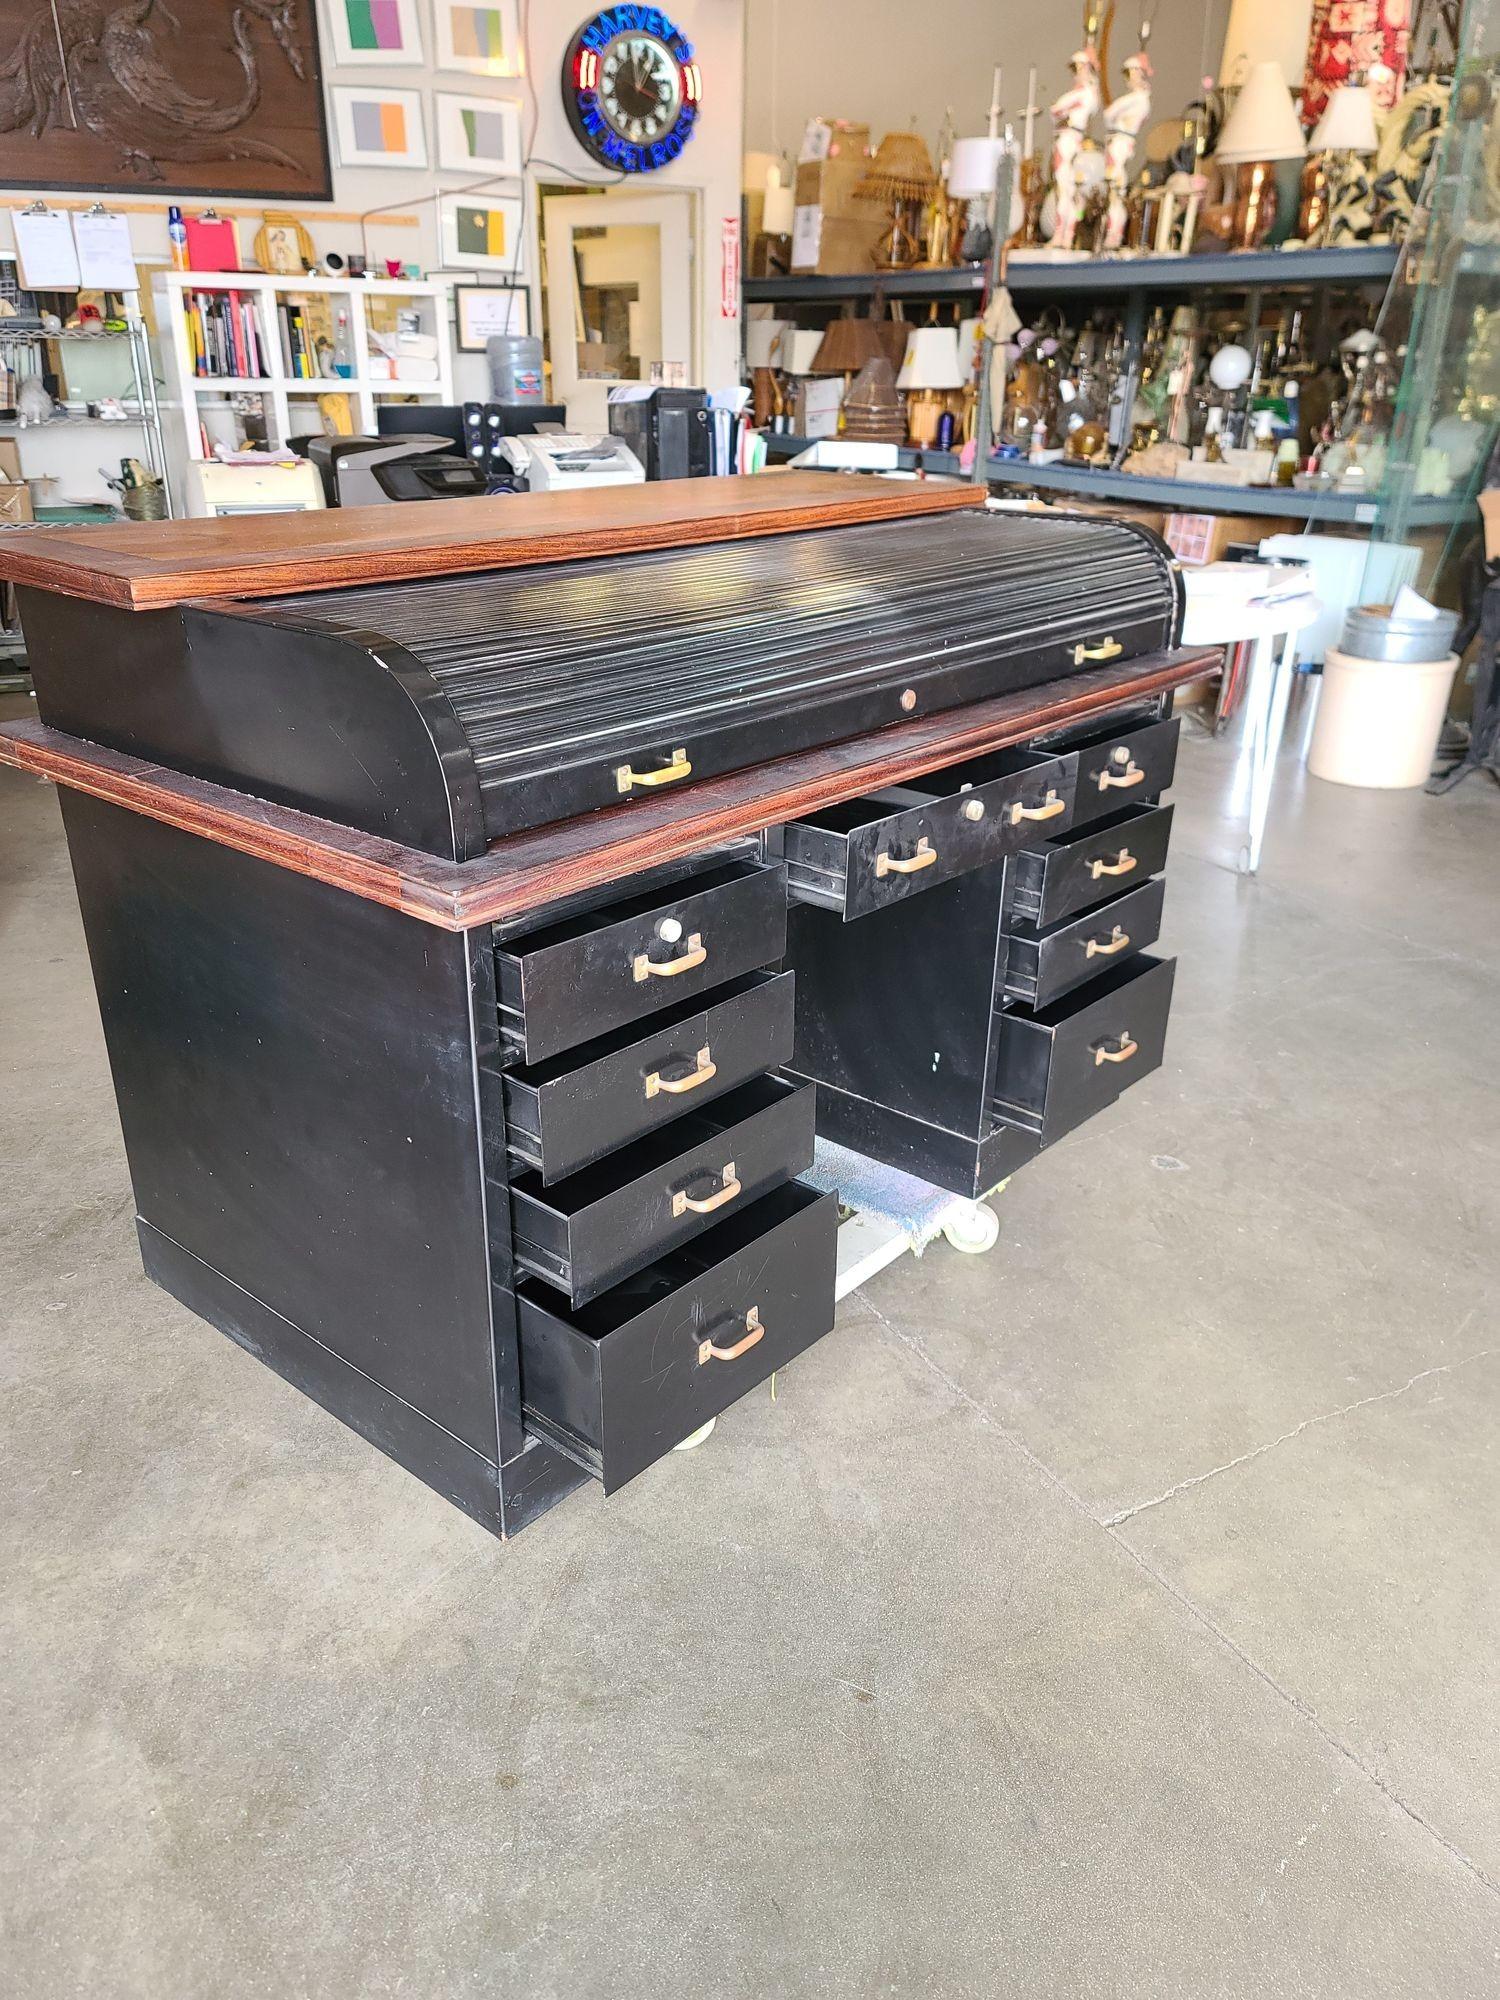 Heavy Industrial metal desk with functional roll top. Opens to an original green rubber flat desk top with multiple compartments. Brass hardware highlights the masculine striped metal finish. A hard to find, one of a kind!